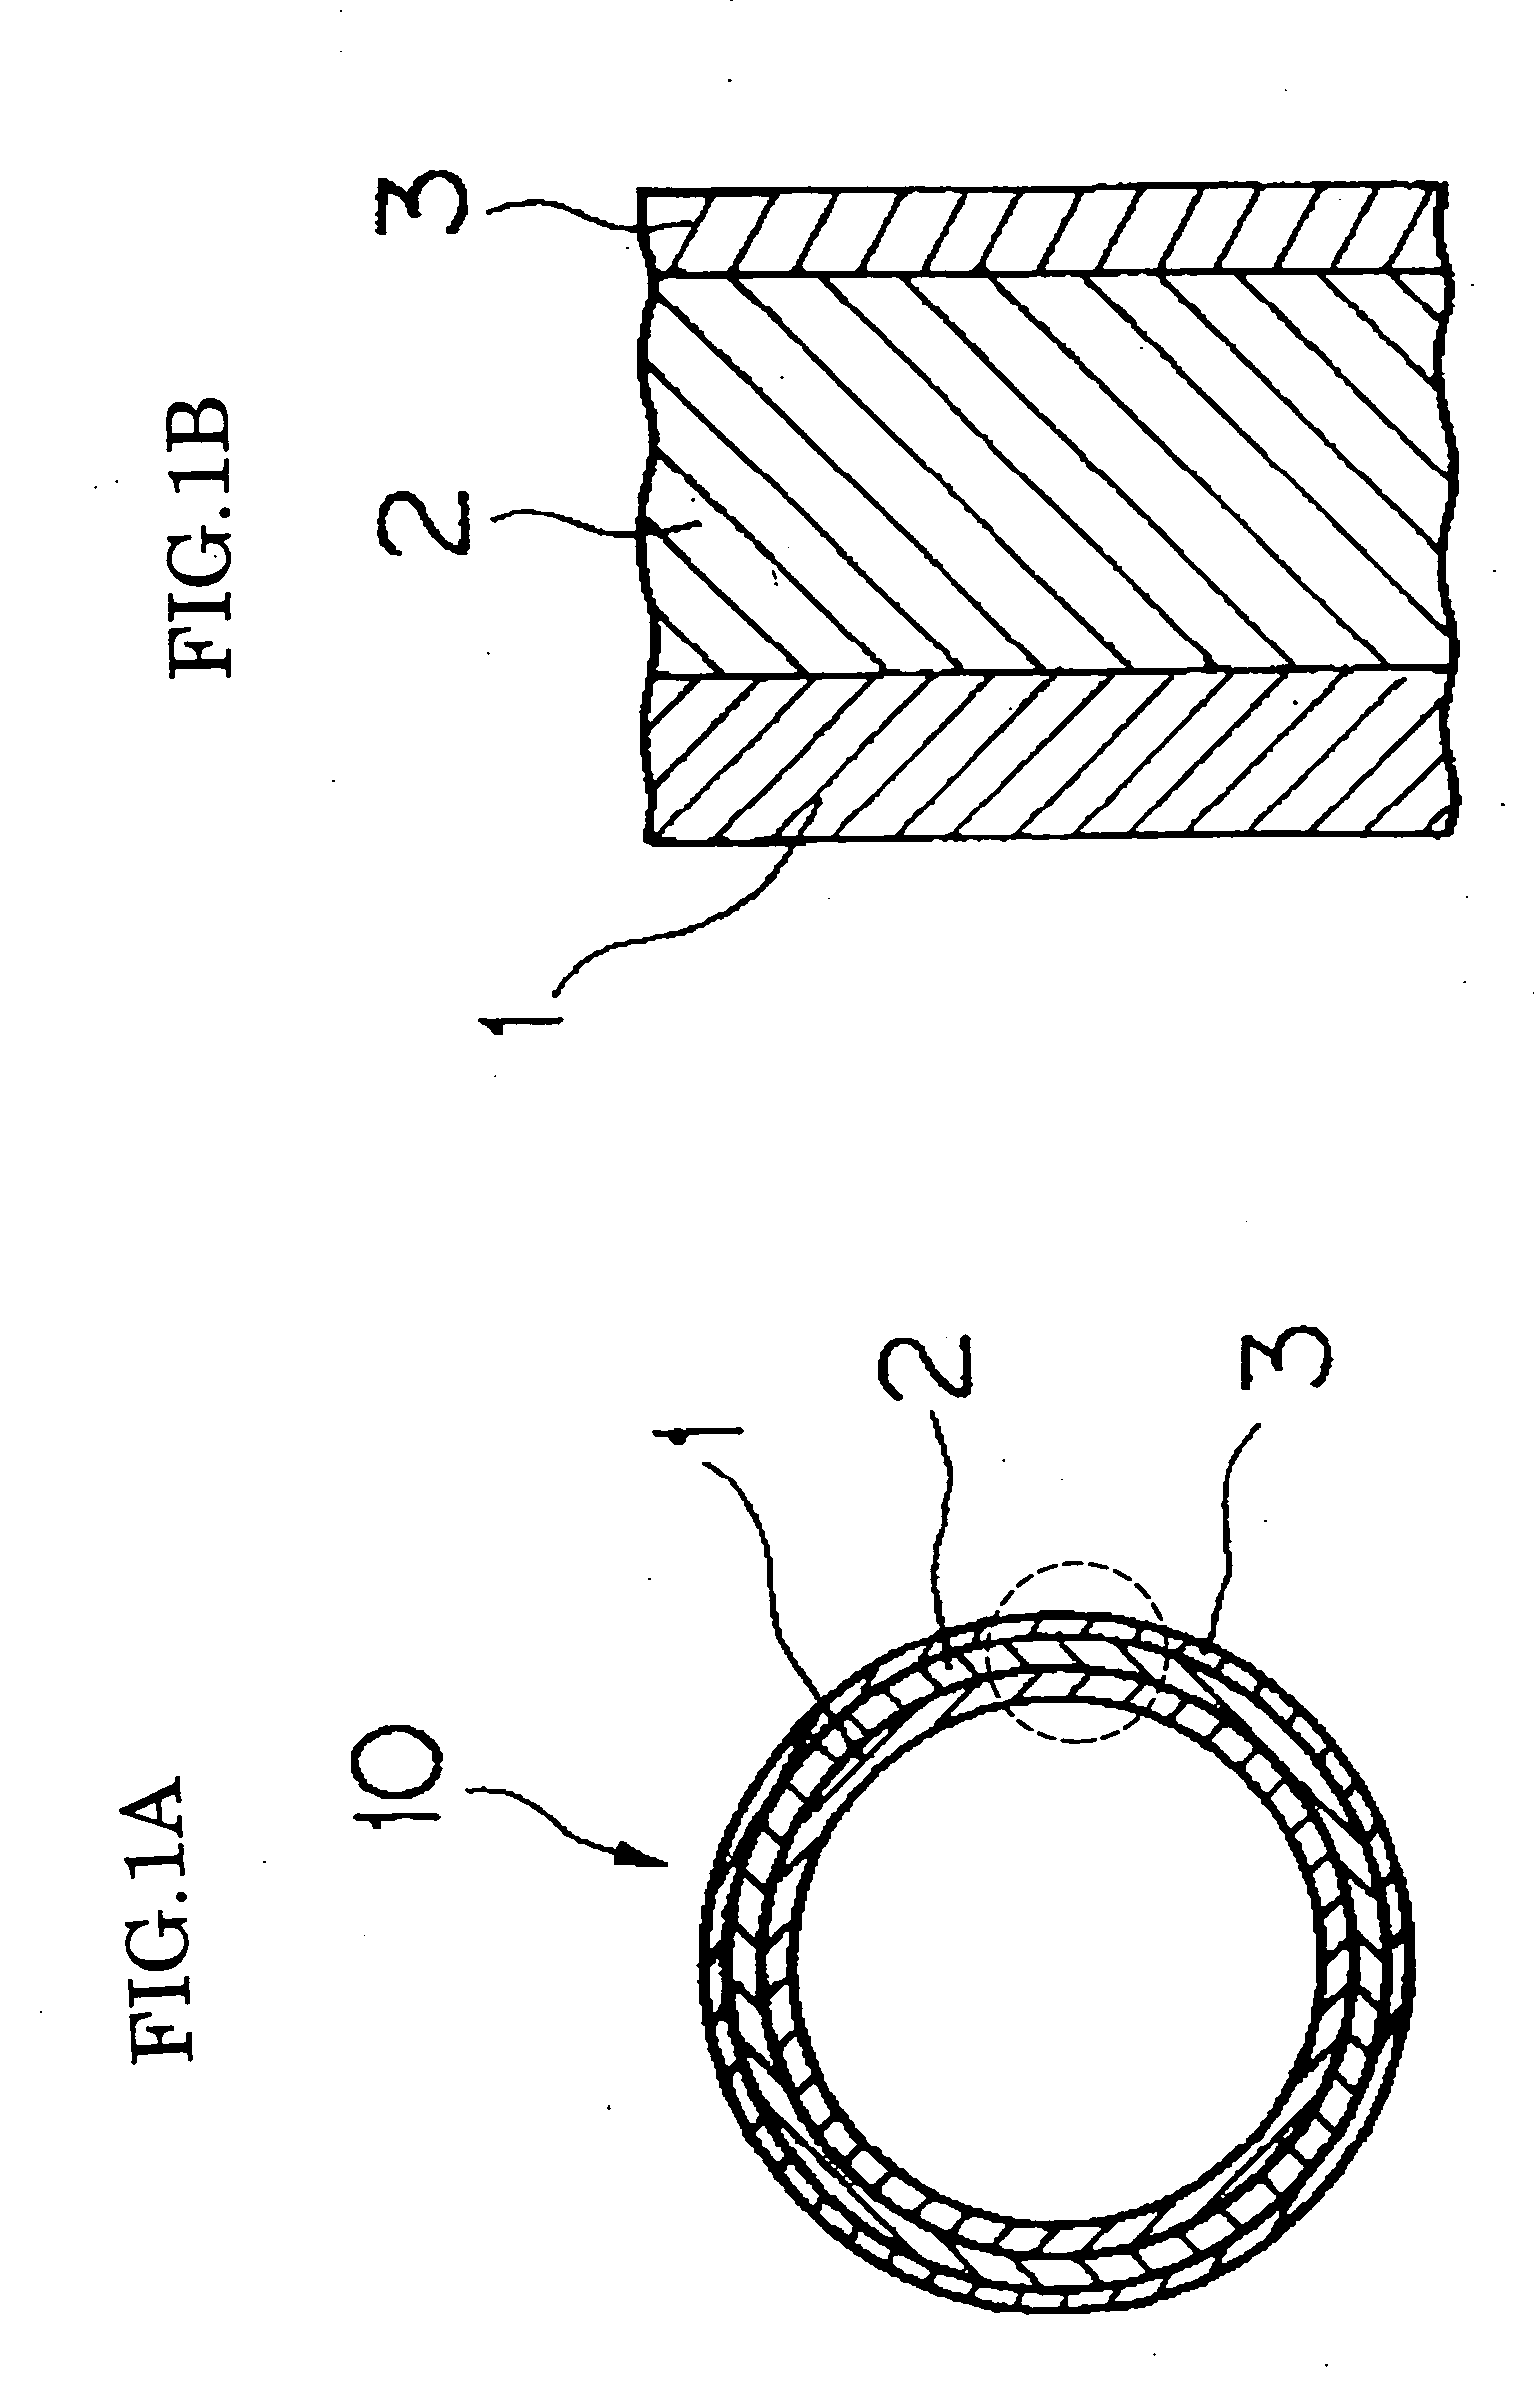 Fixing member, method for producing it, and image forming apparatus comprising the fixing member